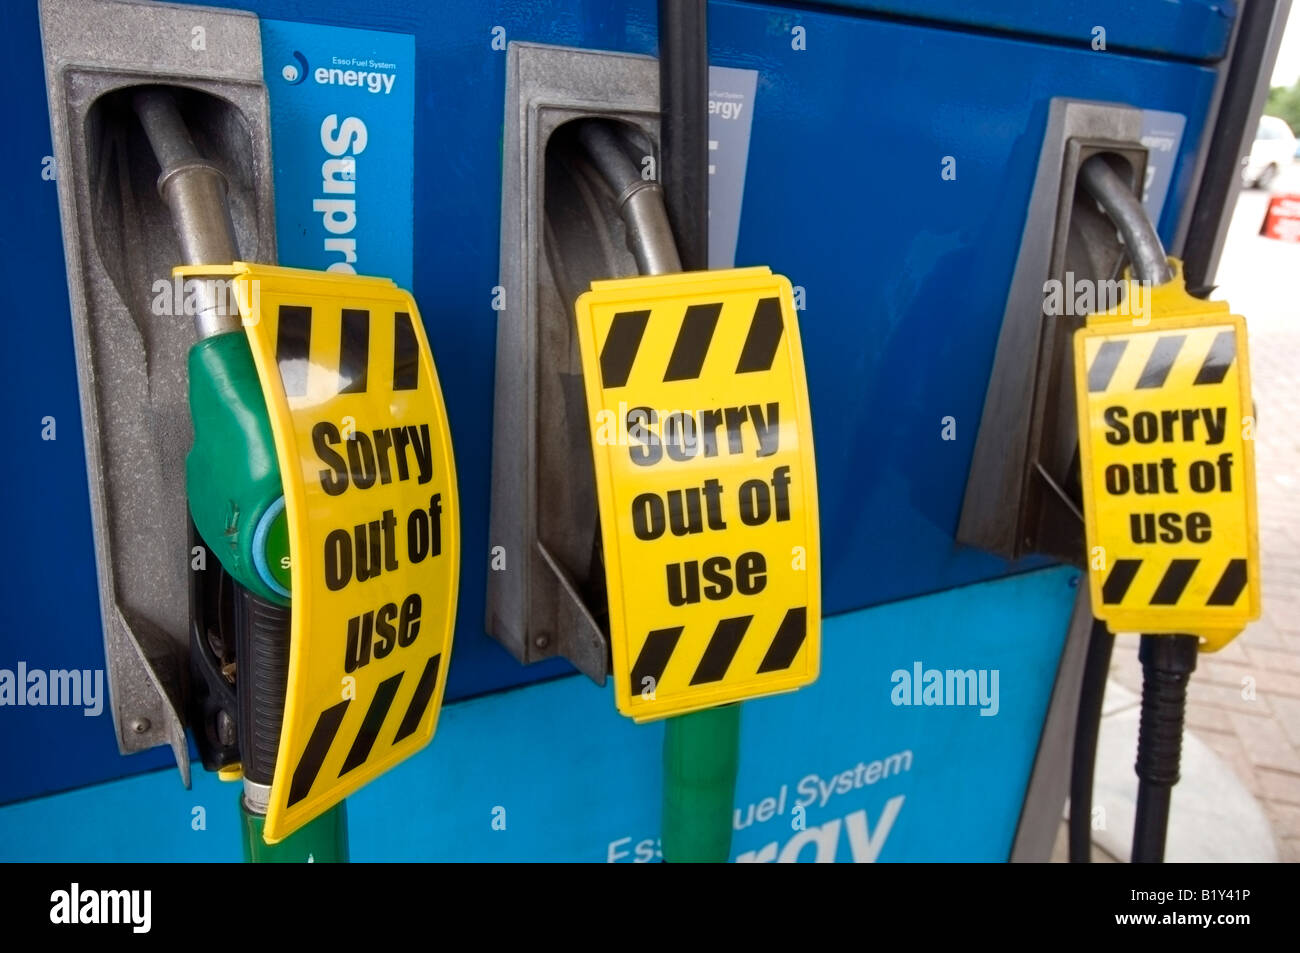 Out of use petrol pumps warning displayed at an Esso petrol station without fuel. Stock Photo